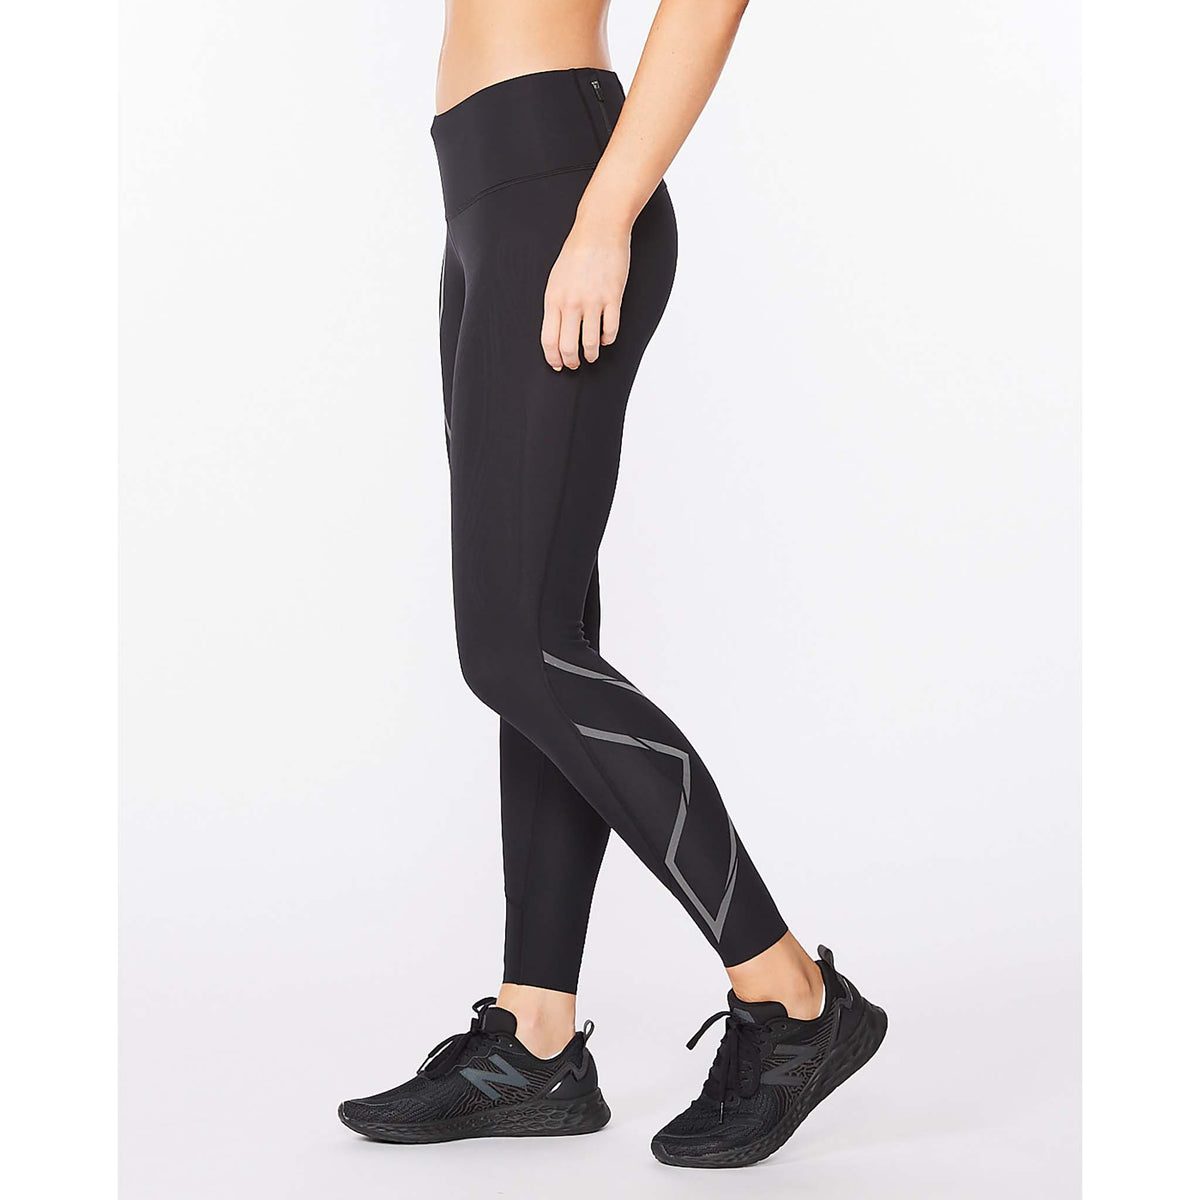 2XU Light Speed Mid-Rise Compression Tights legging compressif noir femme lateral gauche